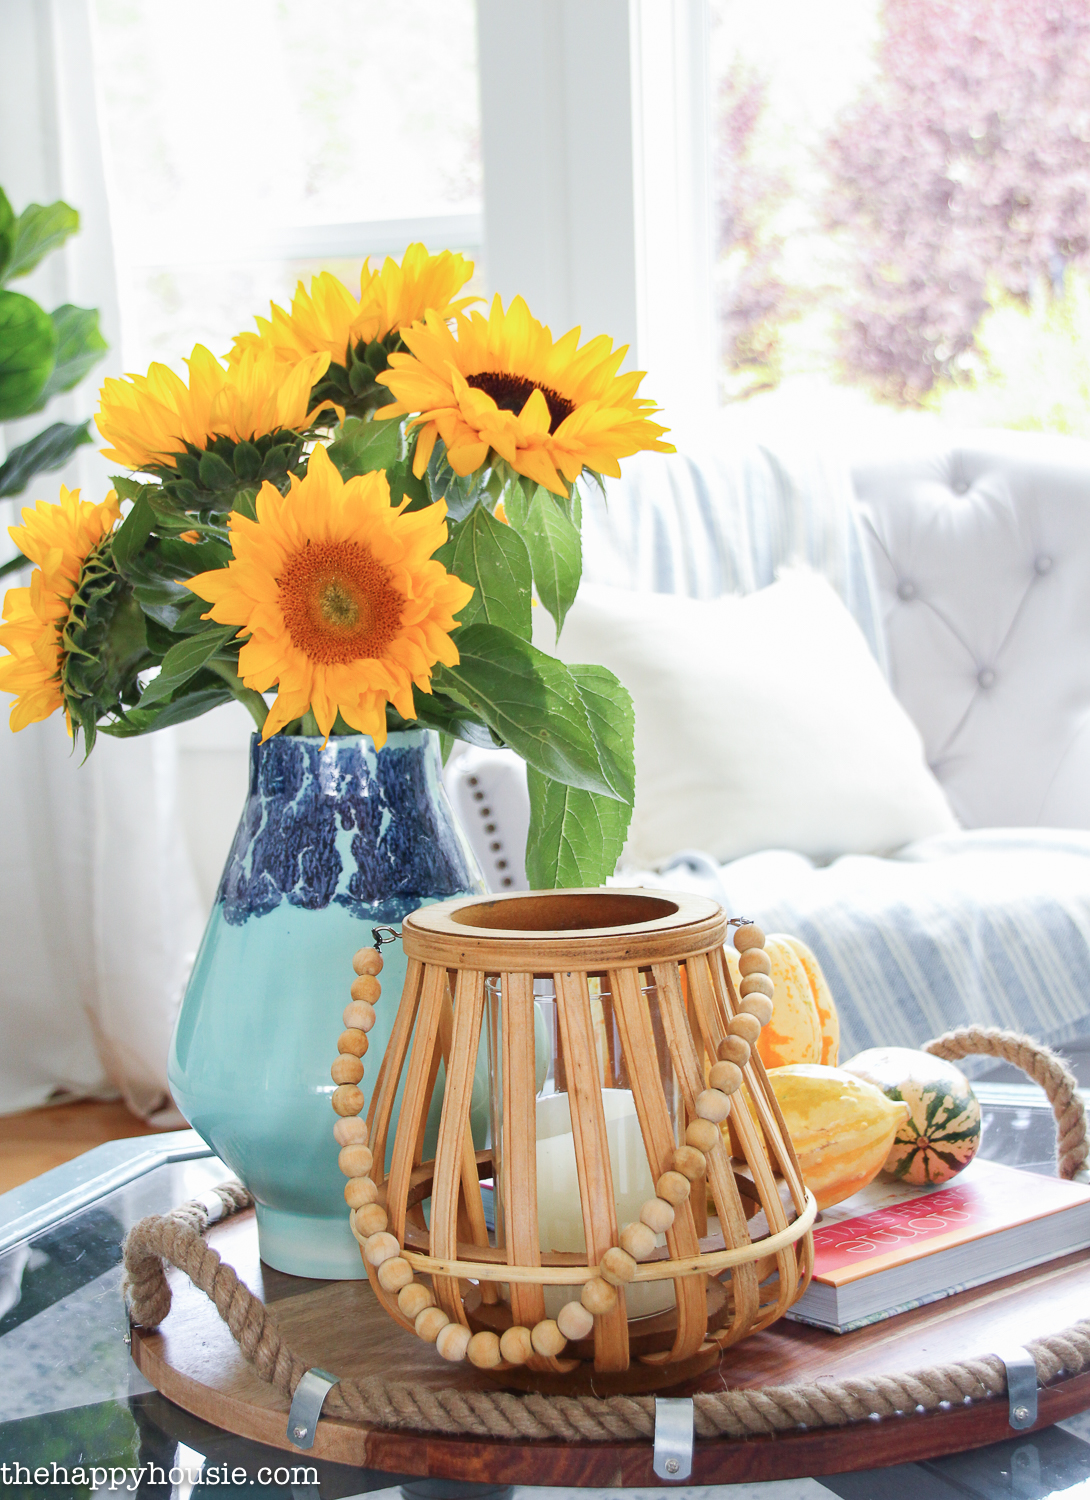 A light and dark blue vase holds the sunflowers on the coffee table.